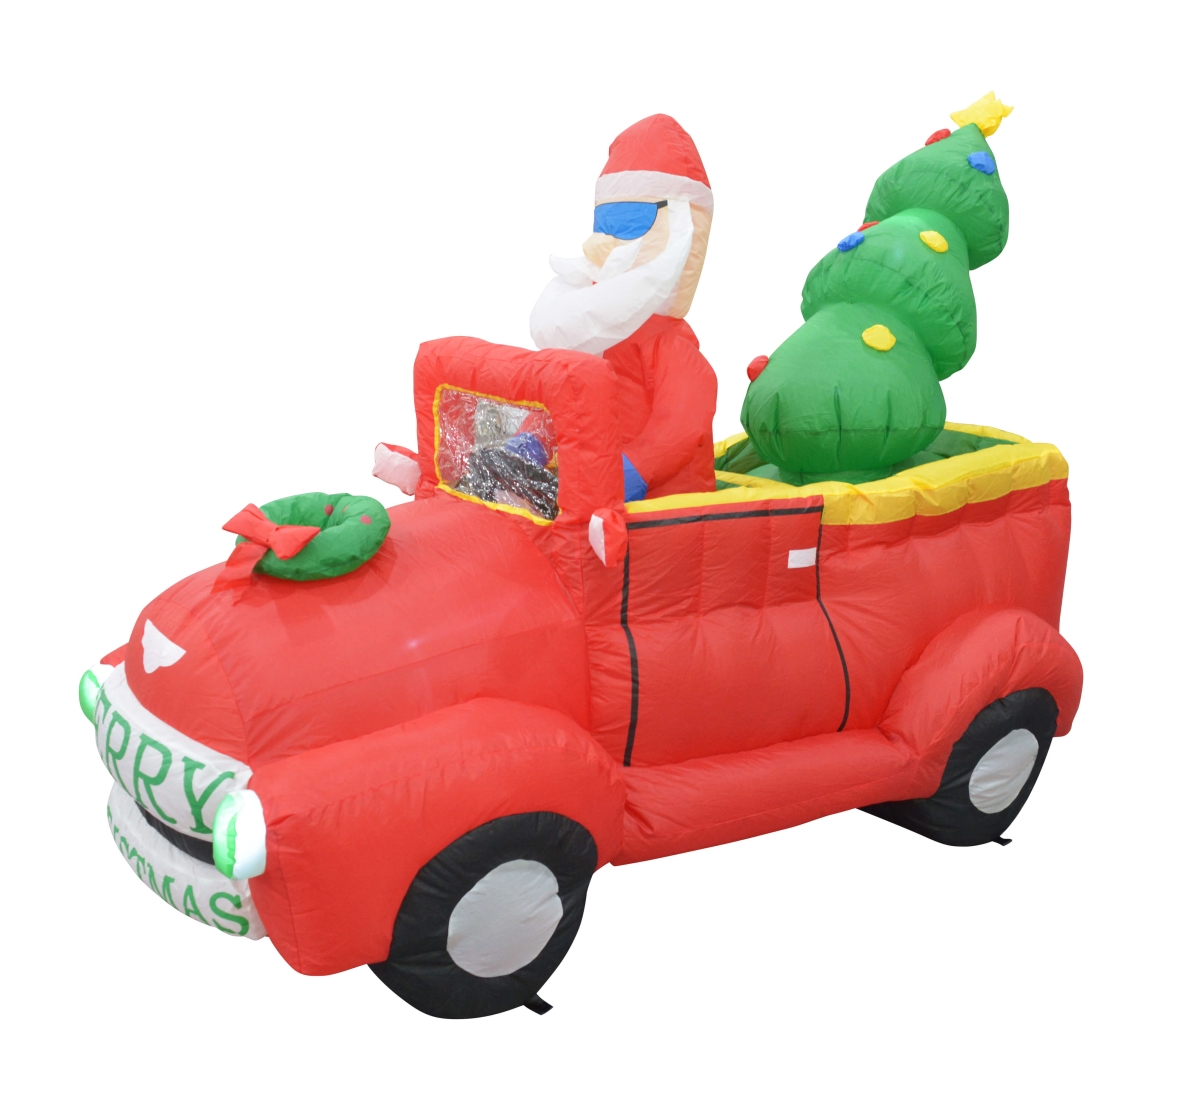 Picture of Jeco CHD-OD061 7 ft. Santa In Red Trunk with Christmas Santa on Car